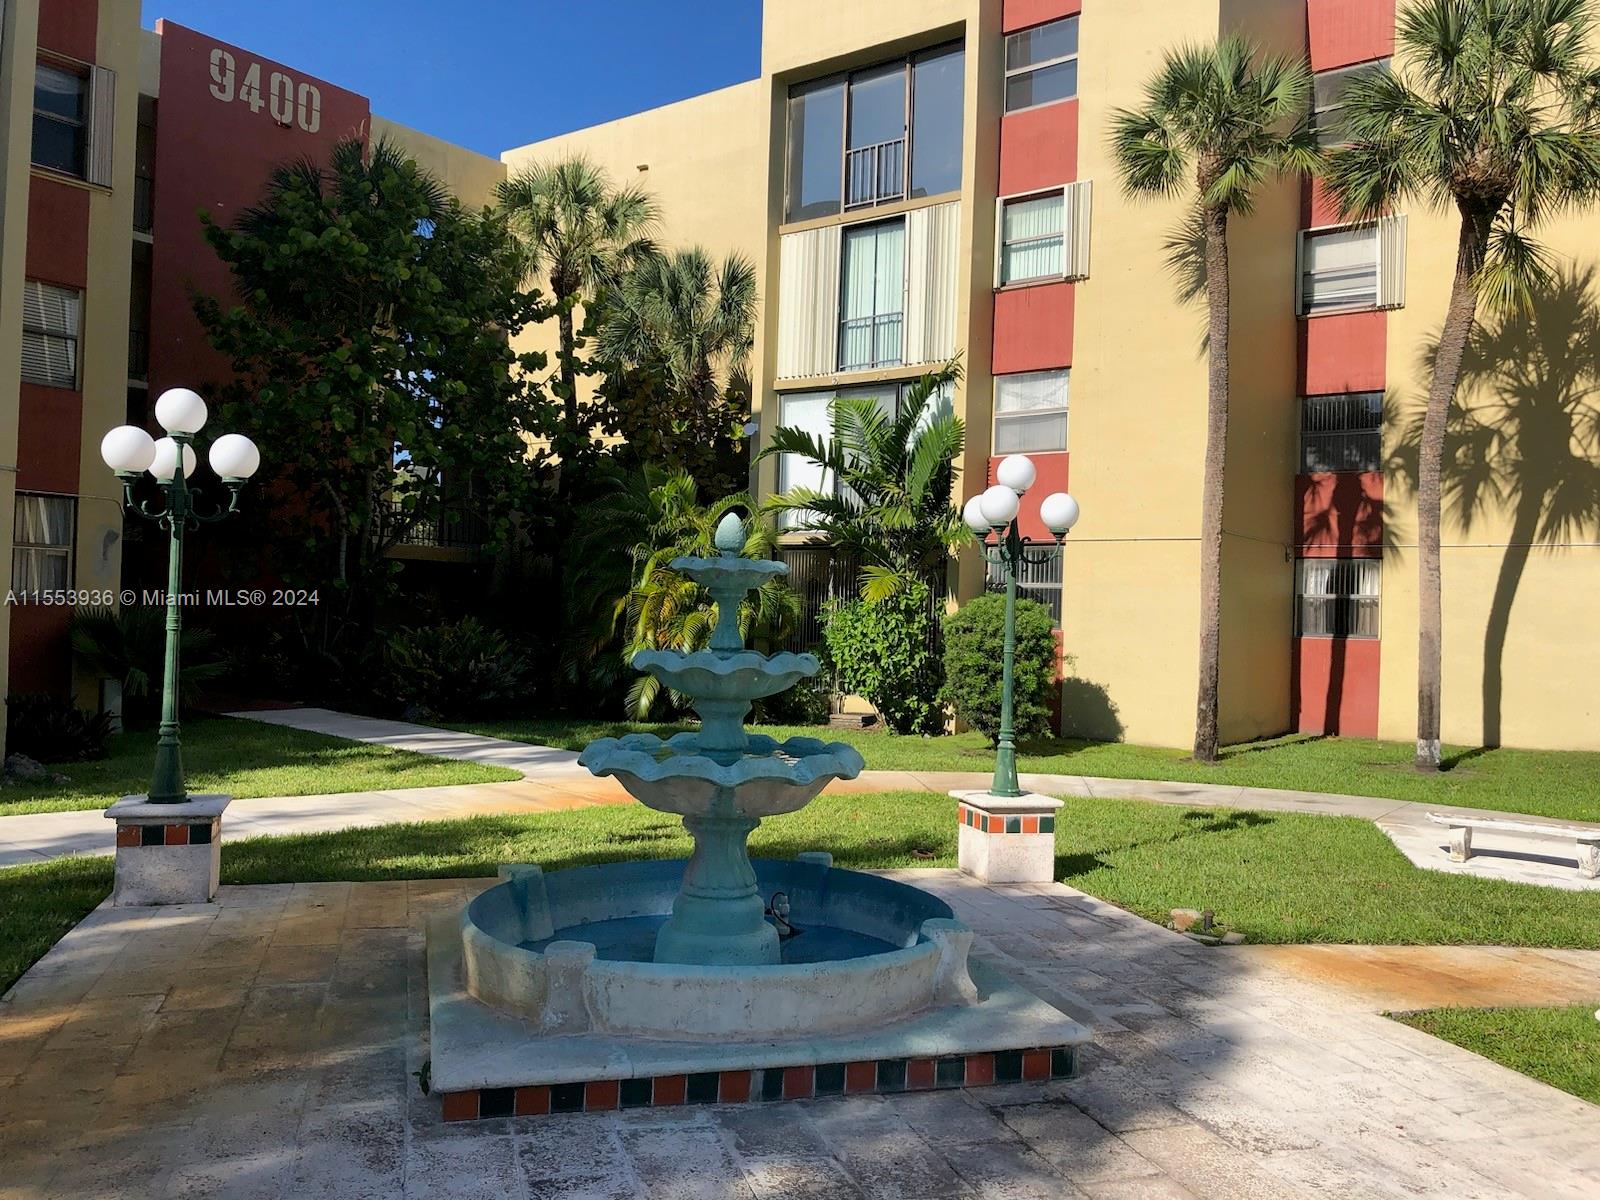 9400 W Flagler St 306, Miami, Florida 33174, 2 Bedrooms Bedrooms, ,2 BathroomsBathrooms,Residentiallease,For Rent,9400 W Flagler St 306,A11553936